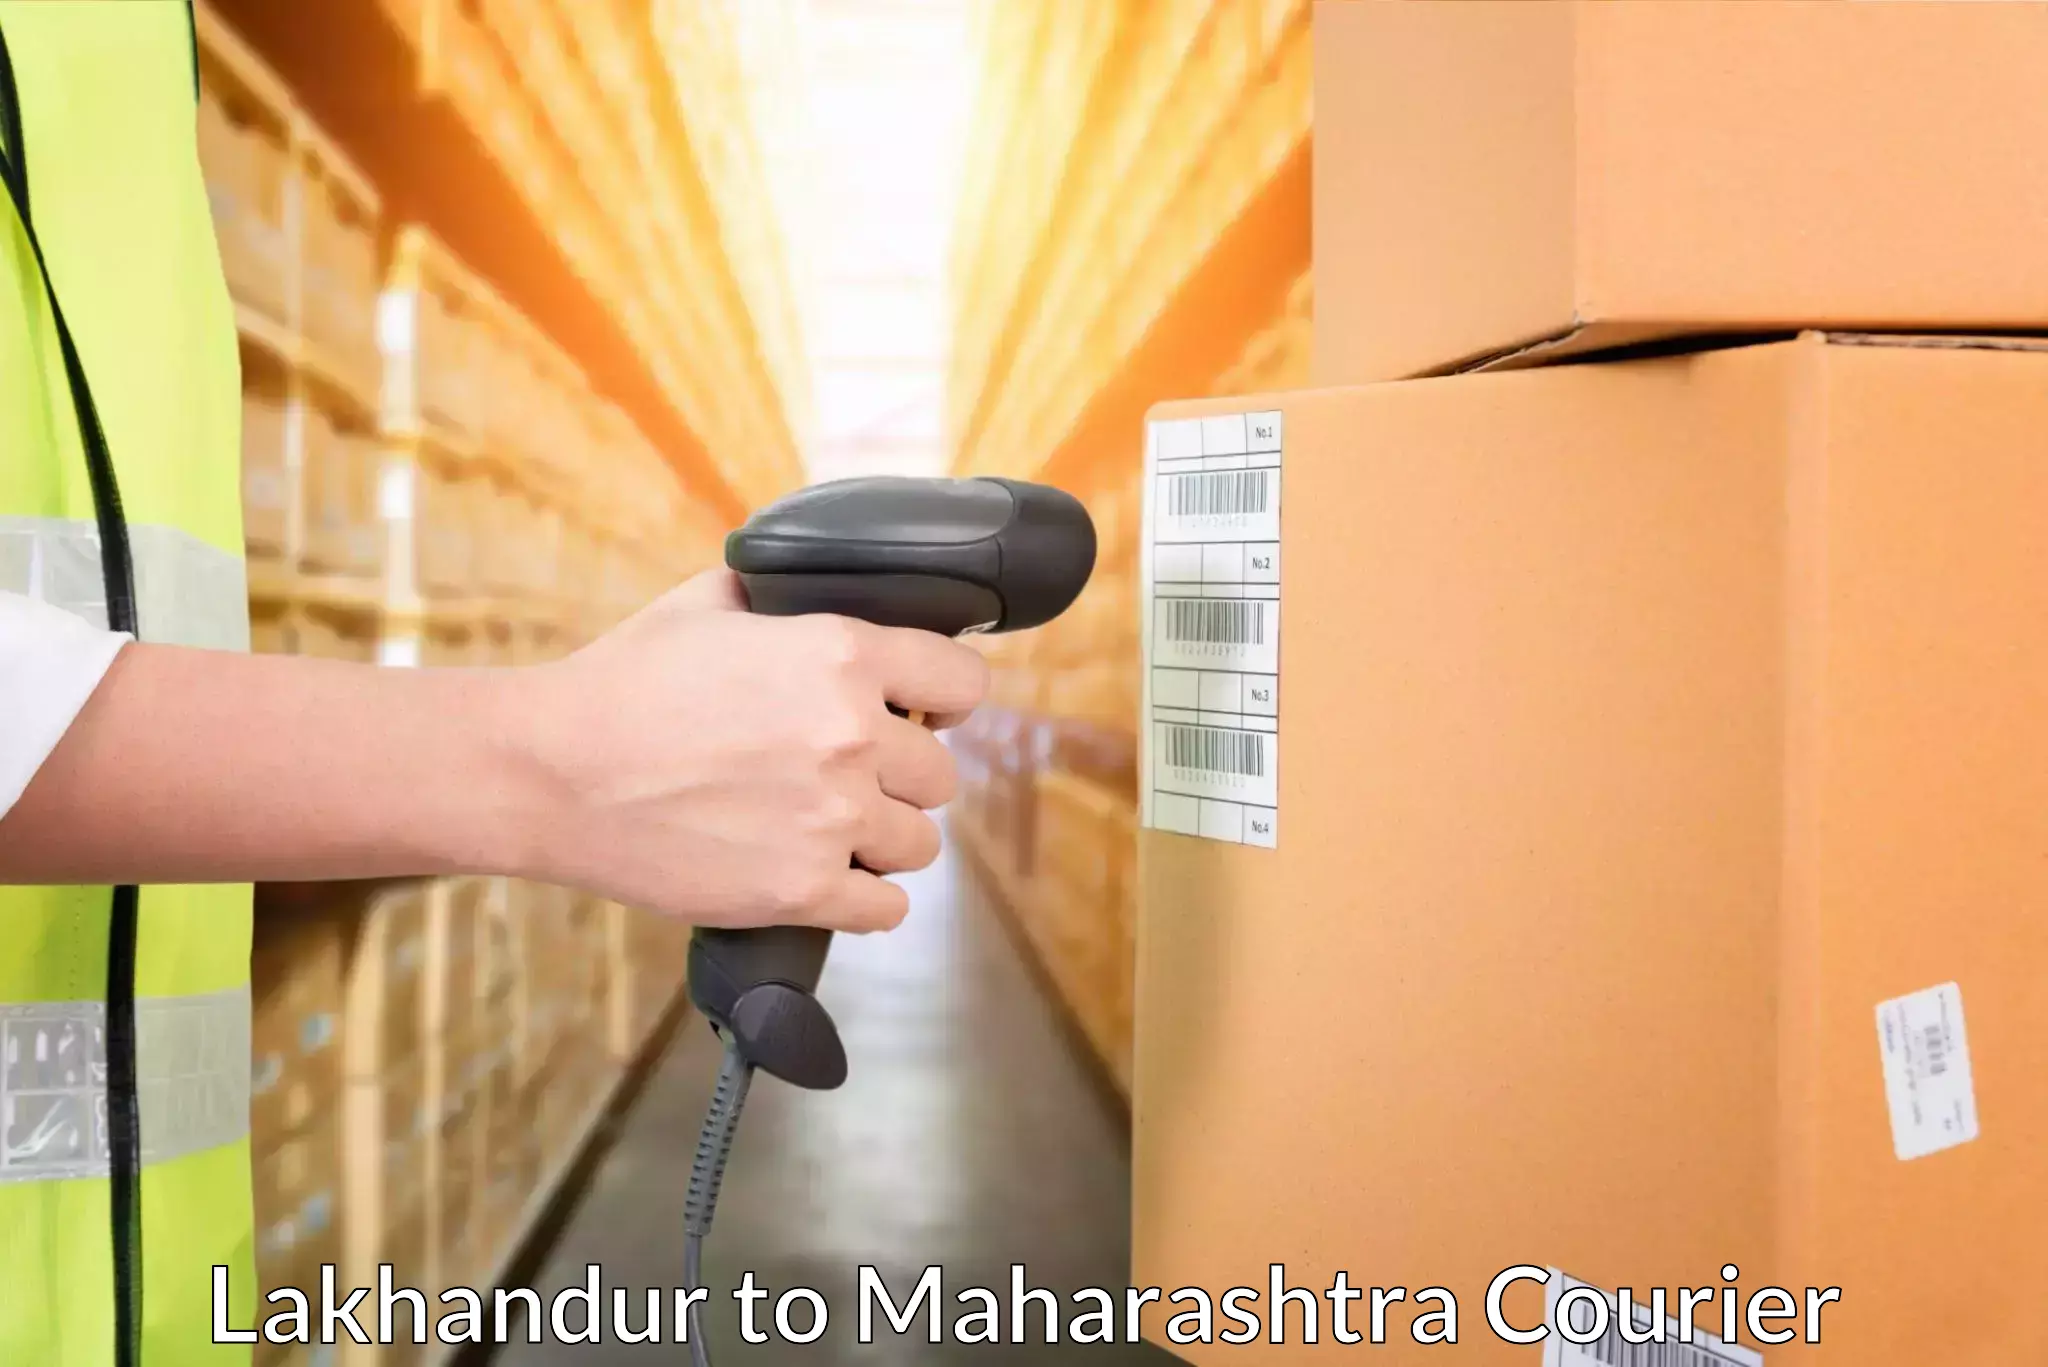 Courier service comparison in Lakhandur to Maharashtra